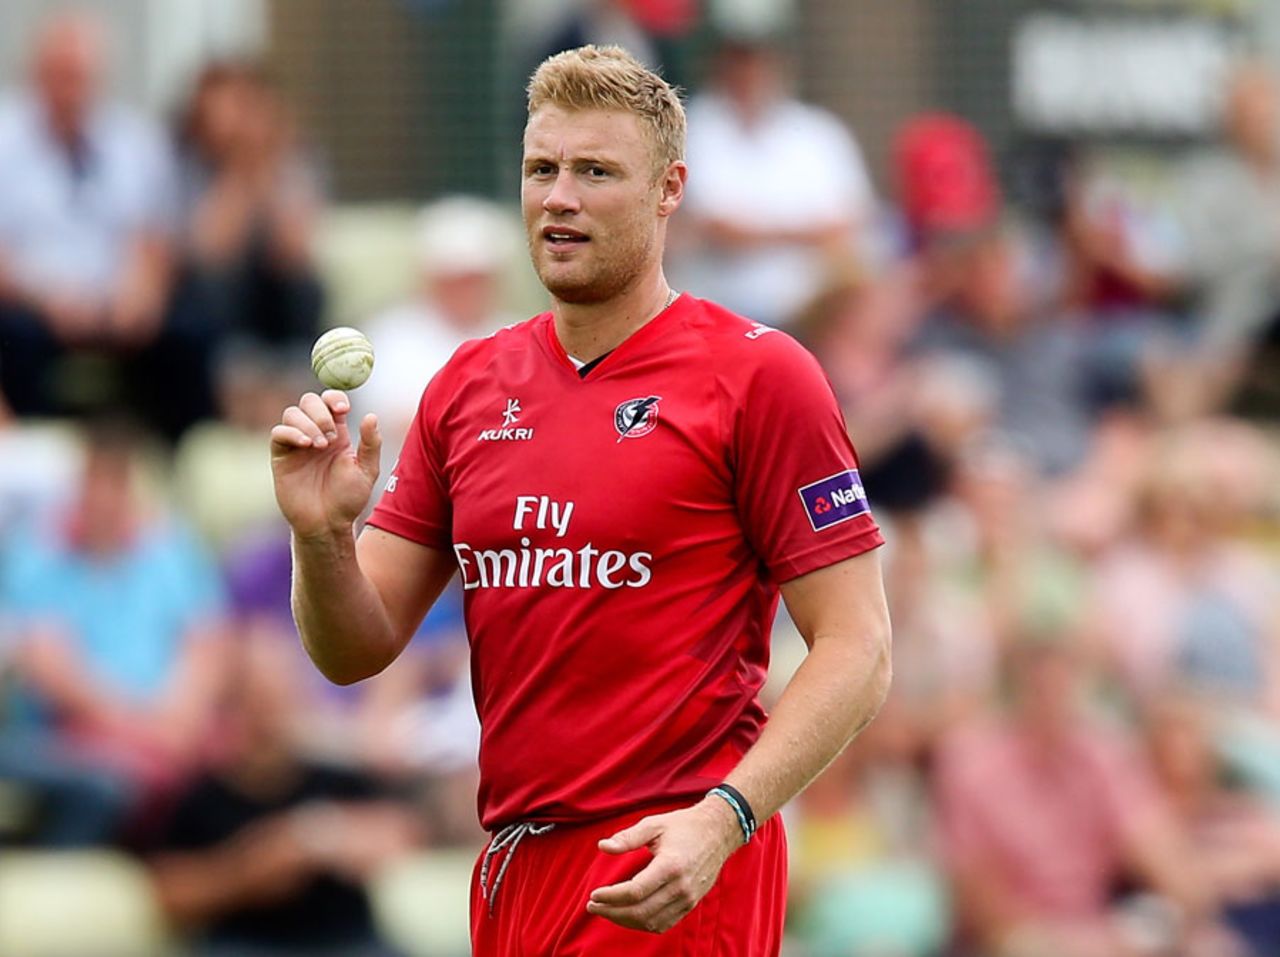 Andrew Flintoff made his first Lancashire appearance in five years, Worcestershire v Lancashire, NatWest Blast 20, Worcester, July 6, 2014